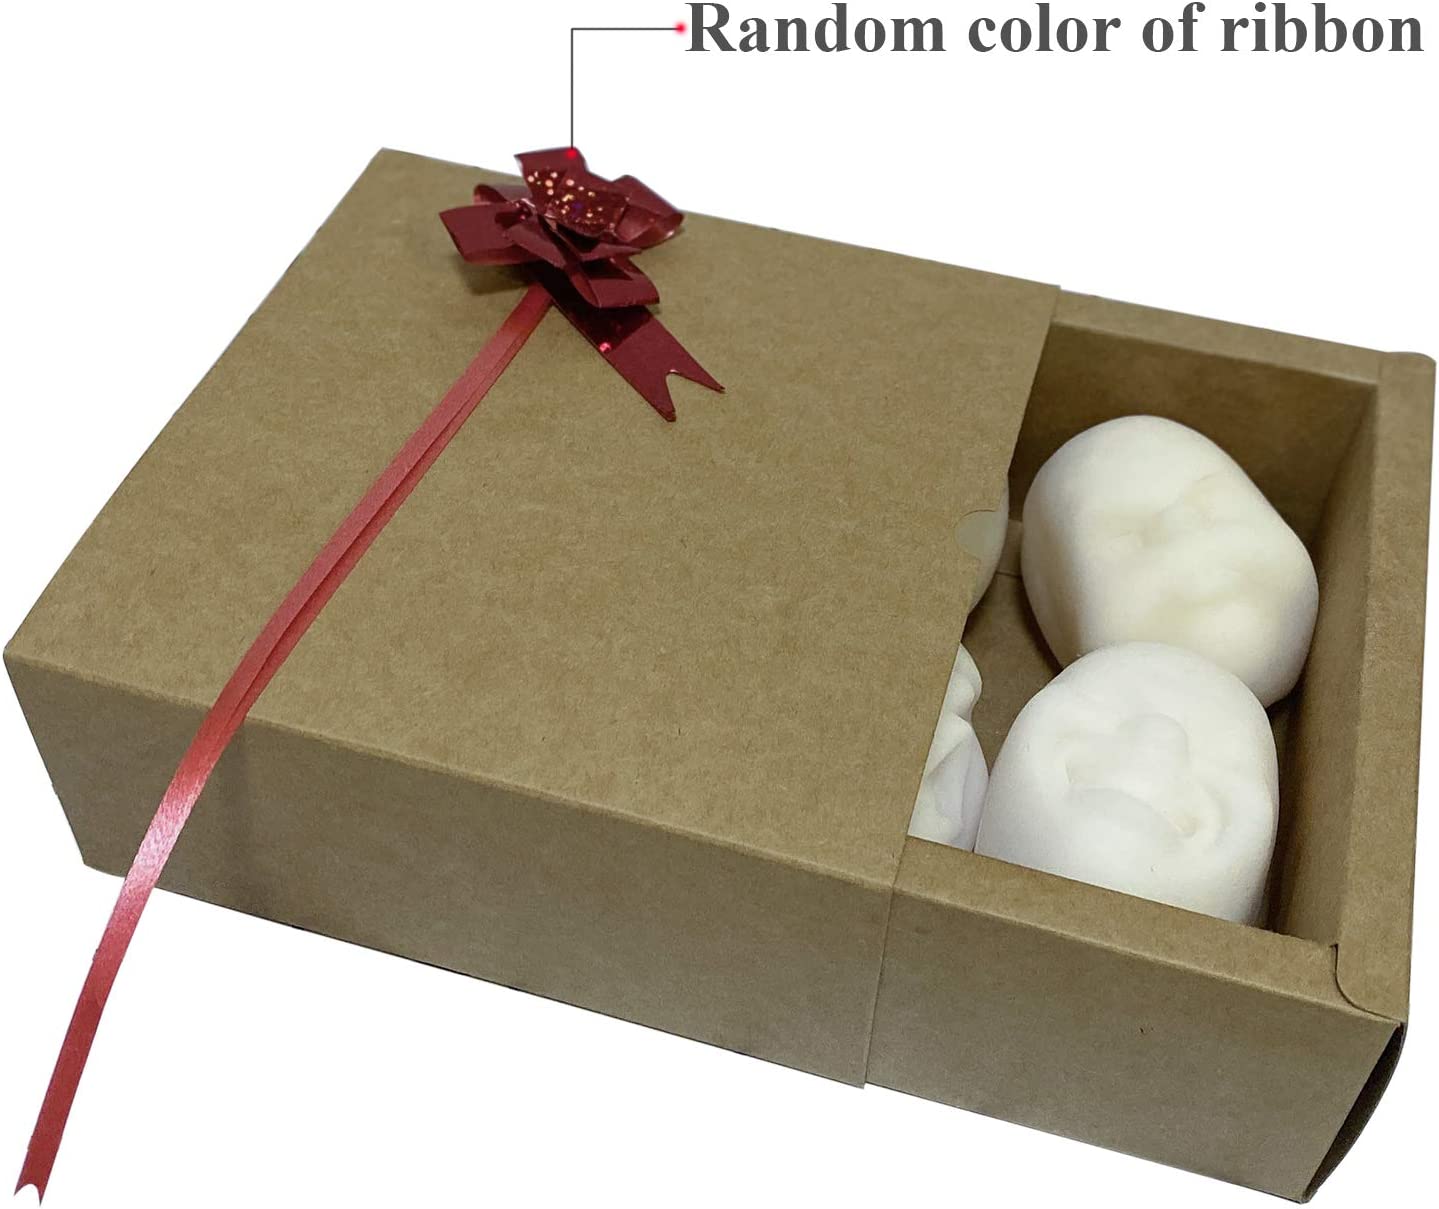 Human face stress balls are packaged up in a gift box. There is a red ribbon on the gift box with the text, 'Random color of ribbon'